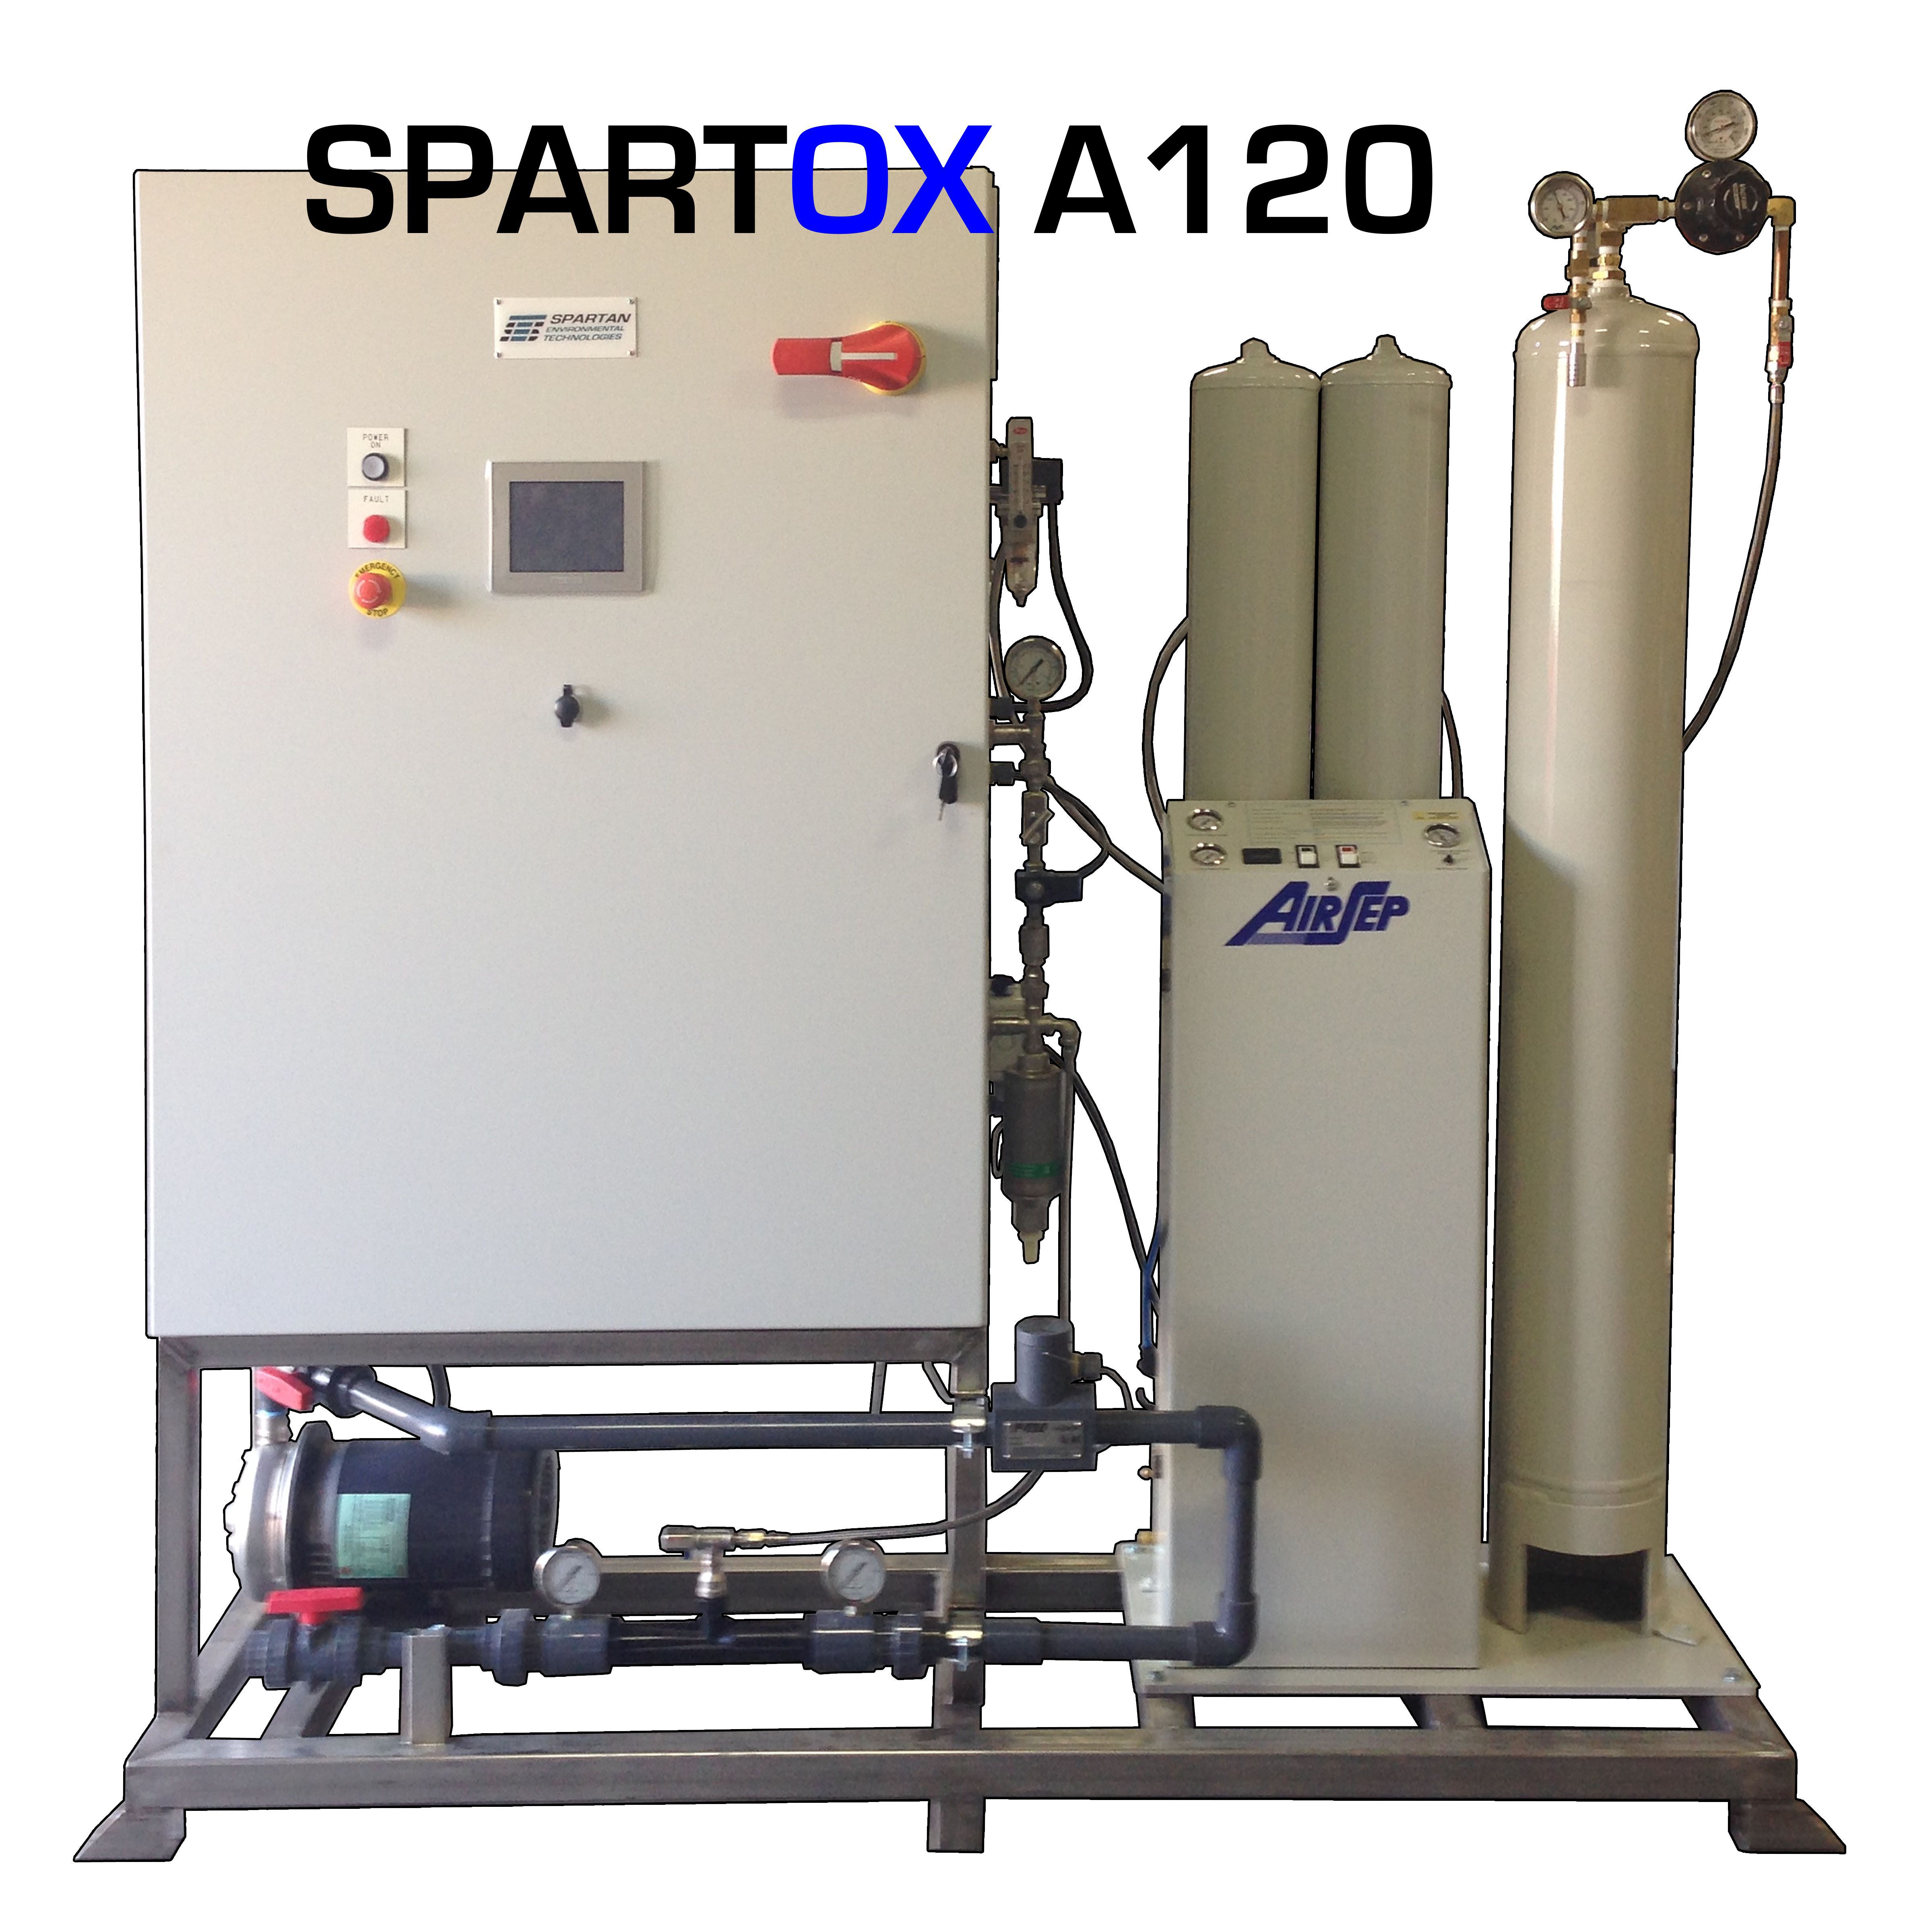 SPARTOX A120 Ozone Water Treatment system